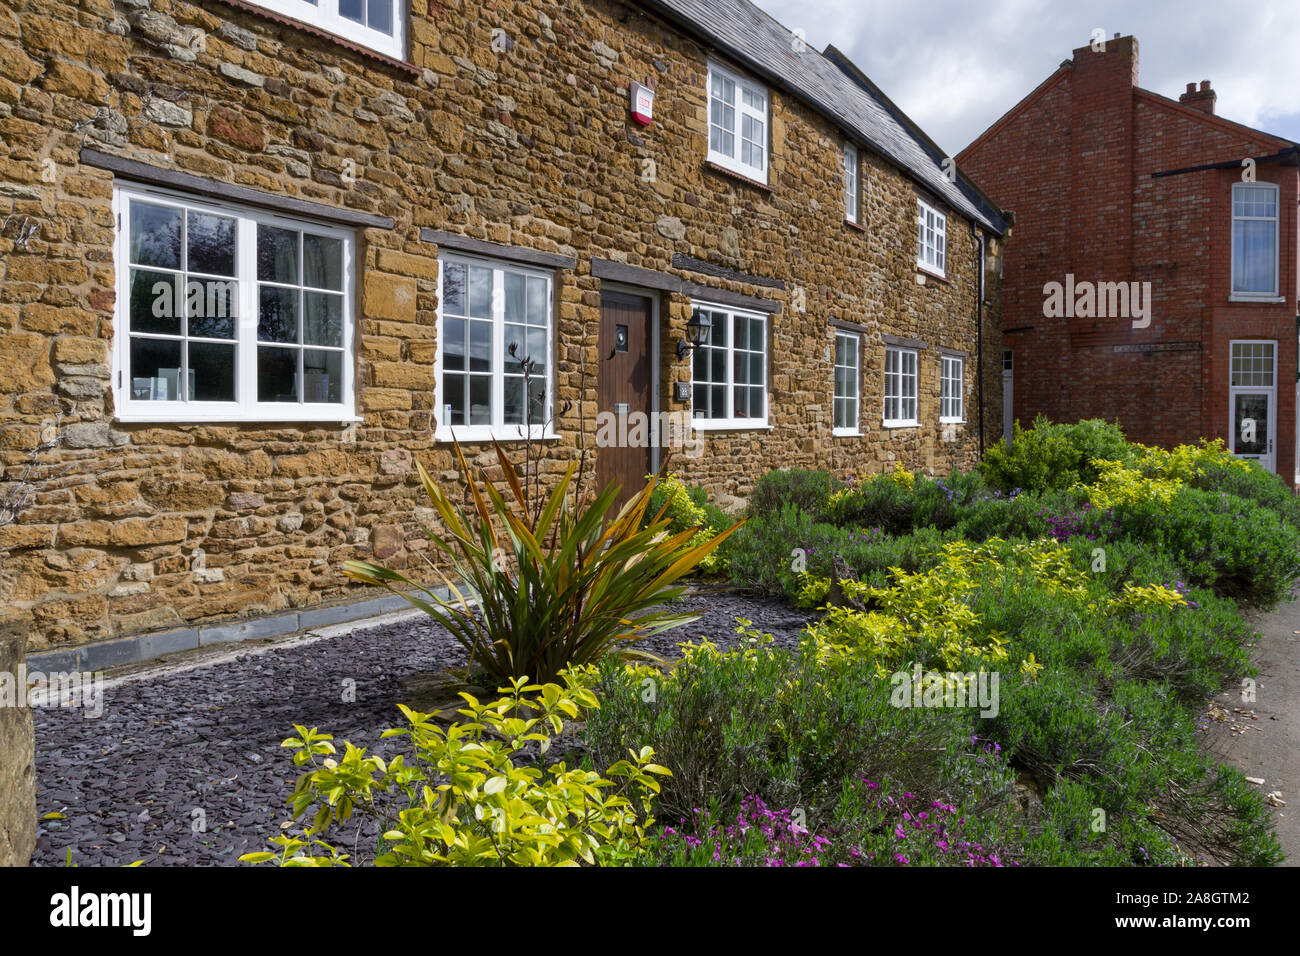 Terrace of old stone built cottages with small but colourful front gardens on the High Street in the village of Earls Barton, Northamptonshire, UK Stock Photo